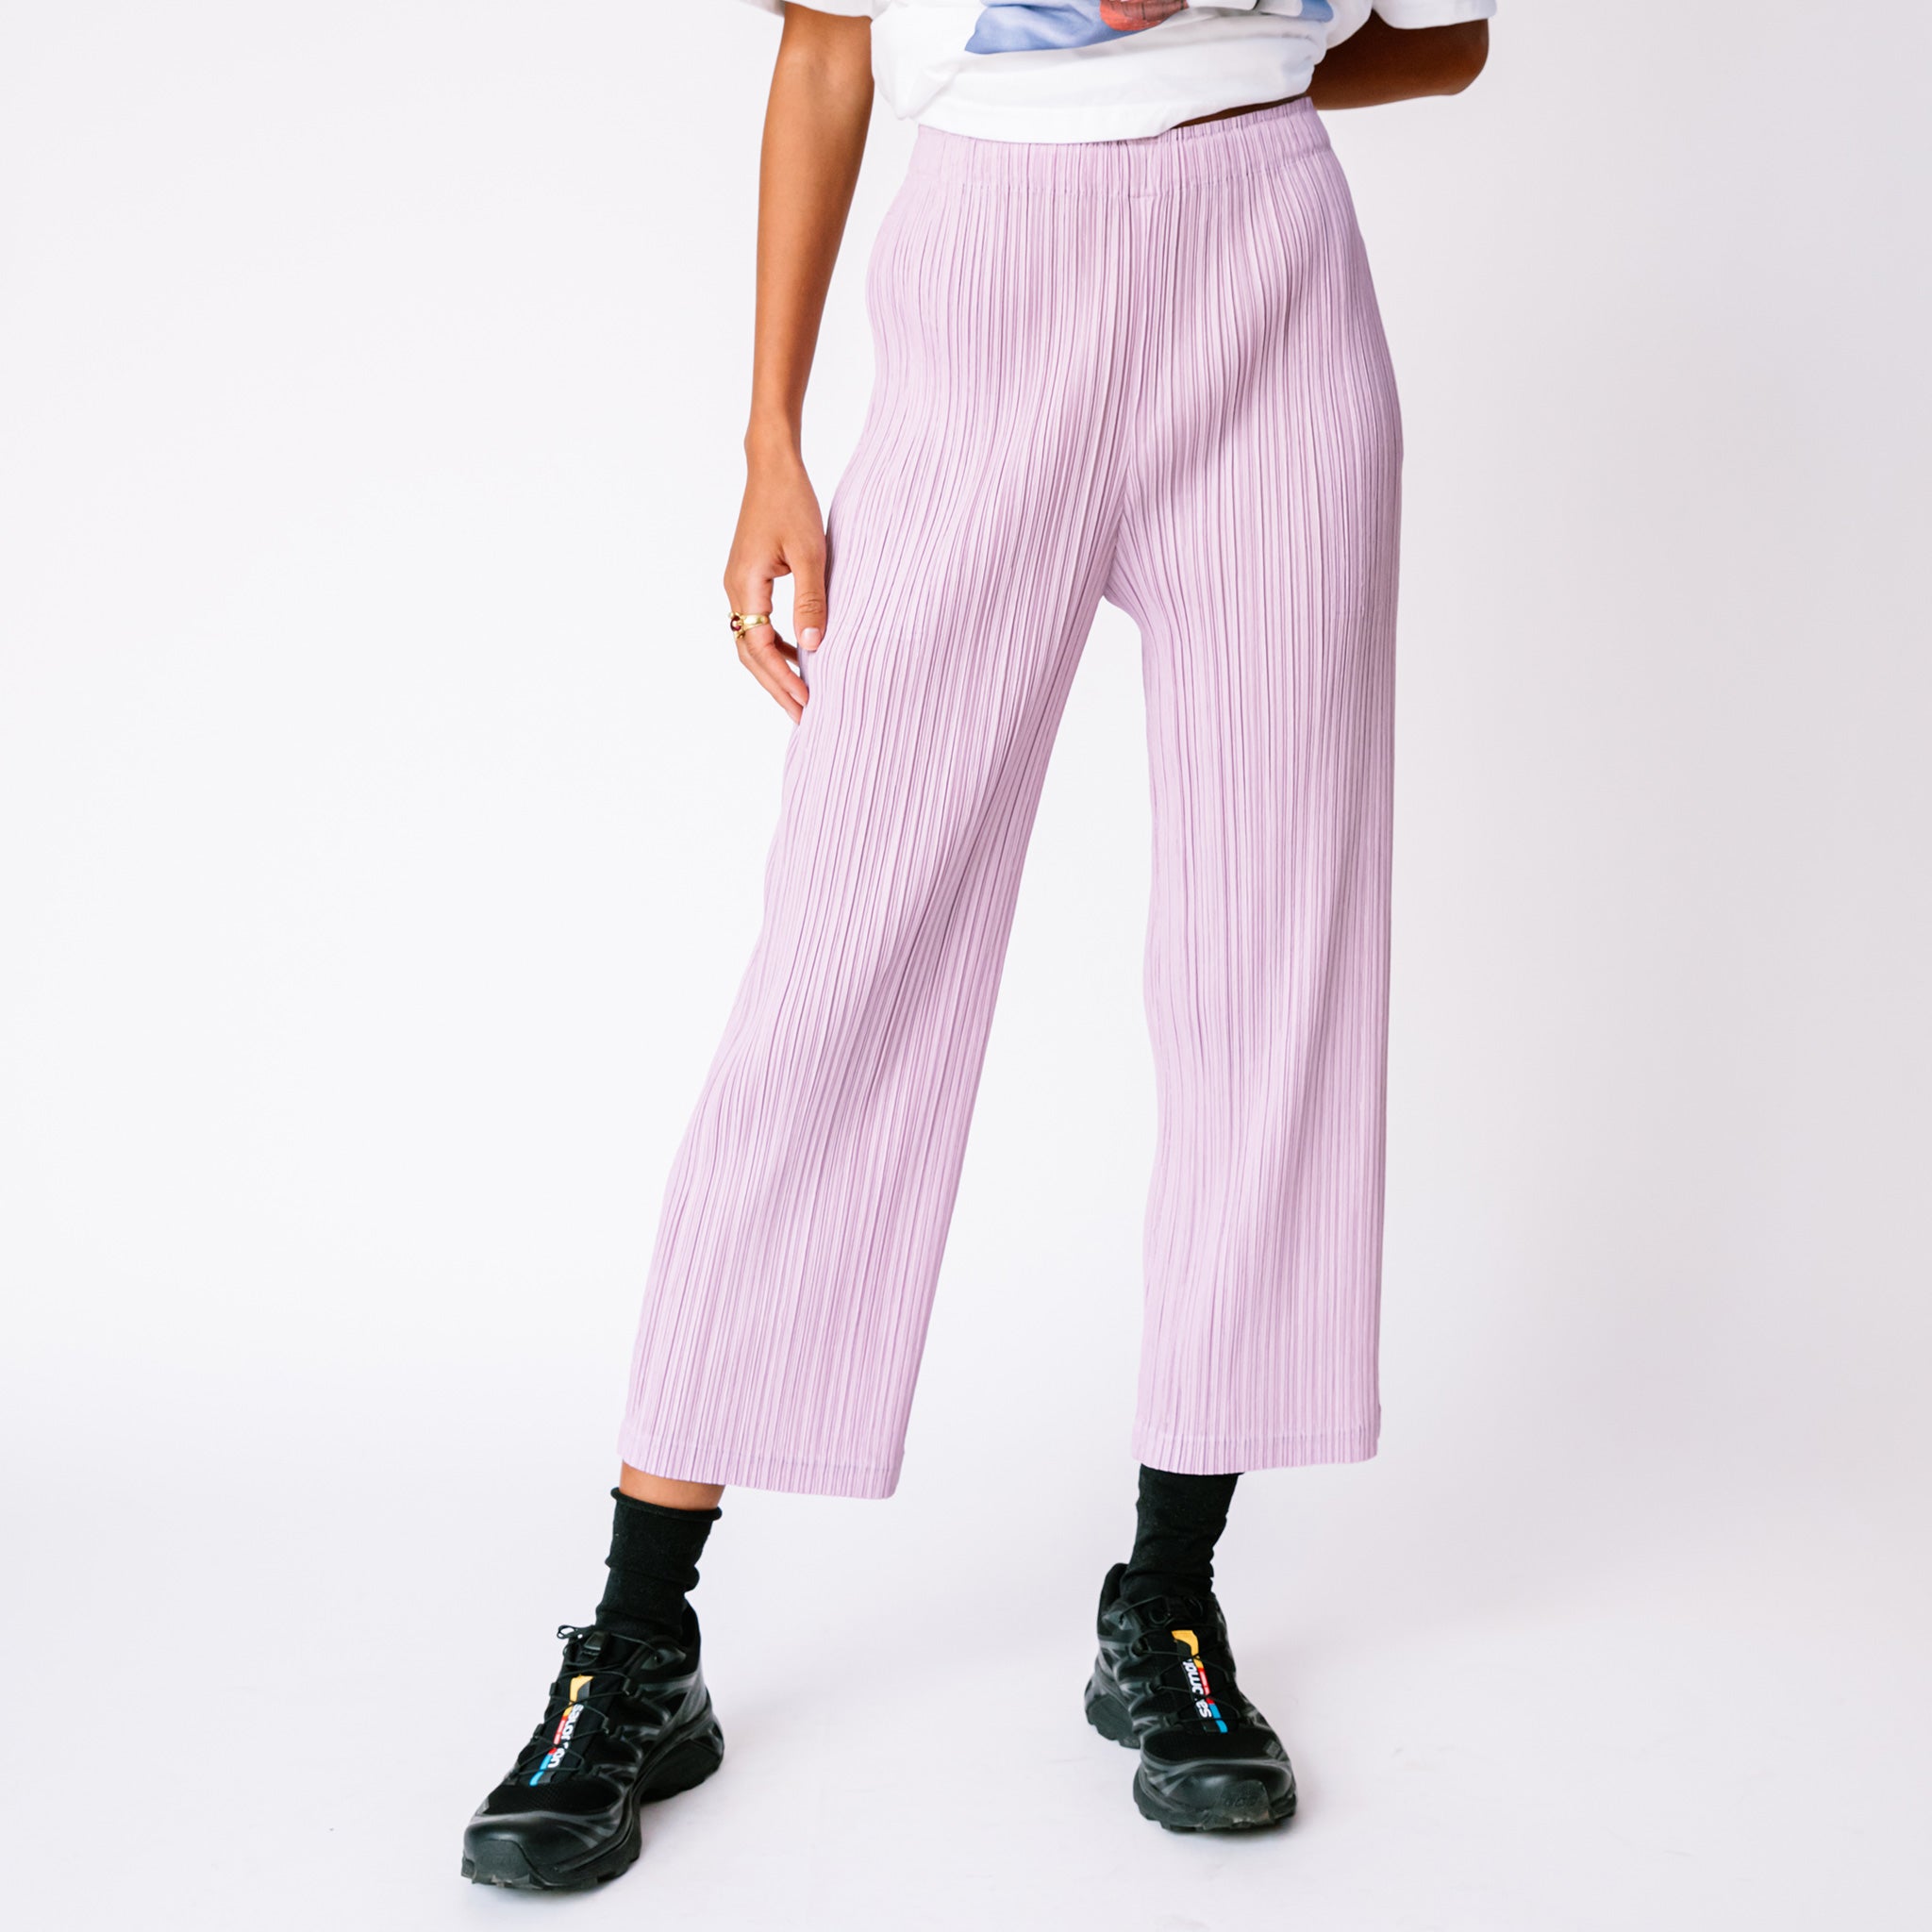 A model wears the Thicker Bottoms Pant in Pink Purple by Pleats Please, paired with black sneakers.